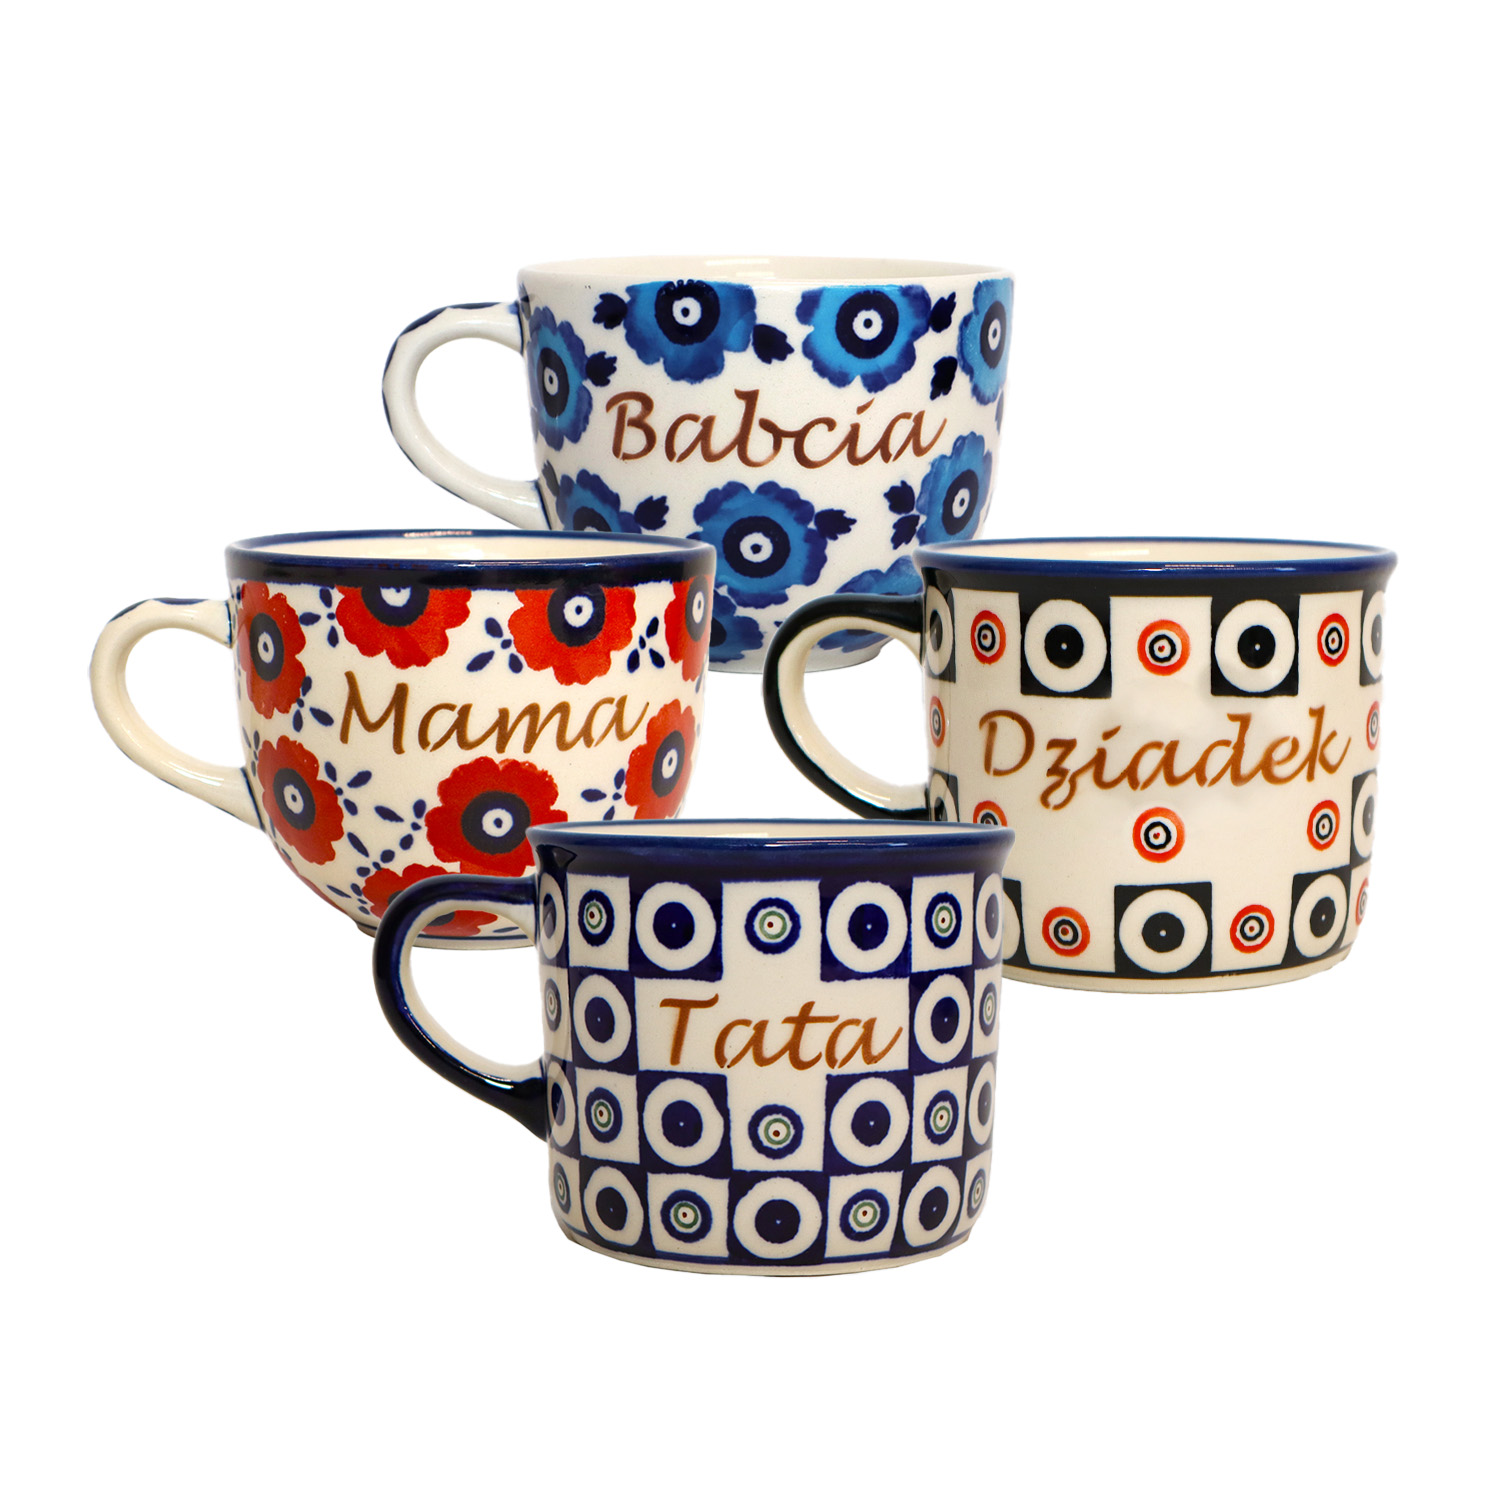 Mugs with inscriptions